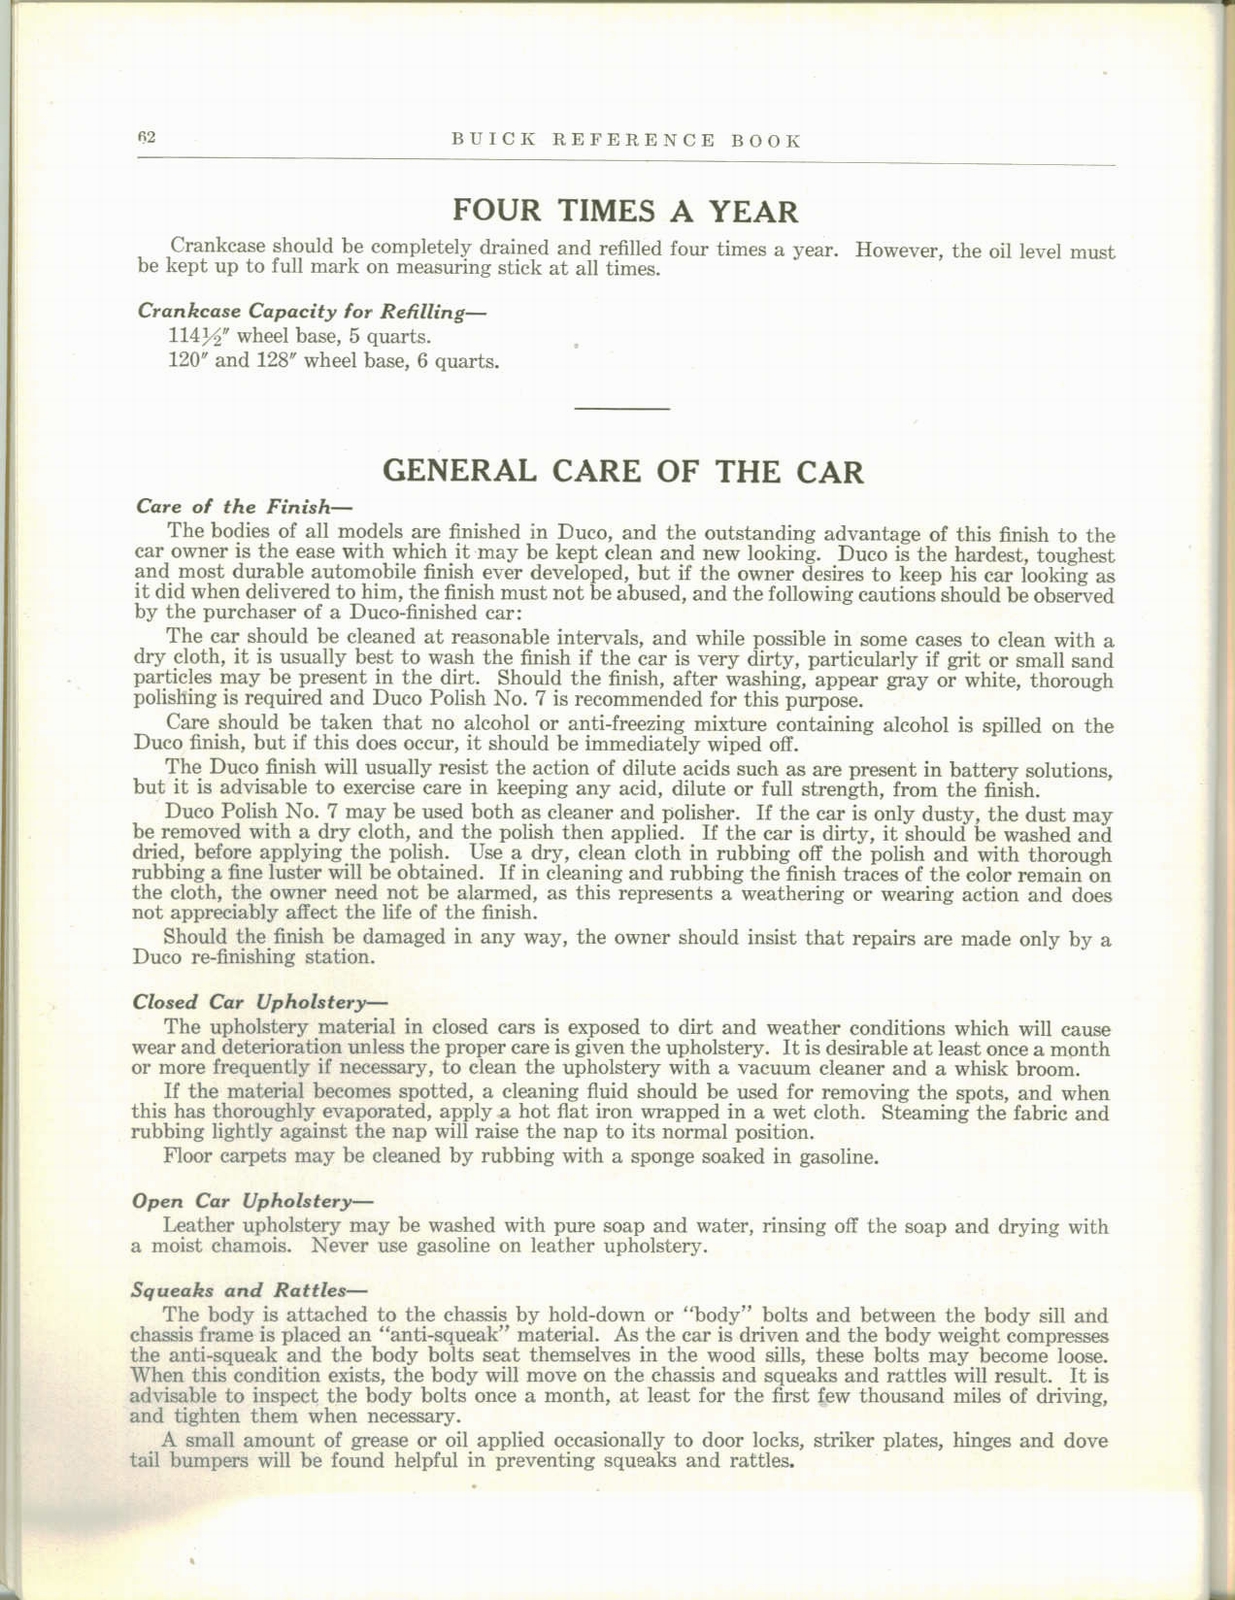 n_1928 Buick Reference Book-62.jpg